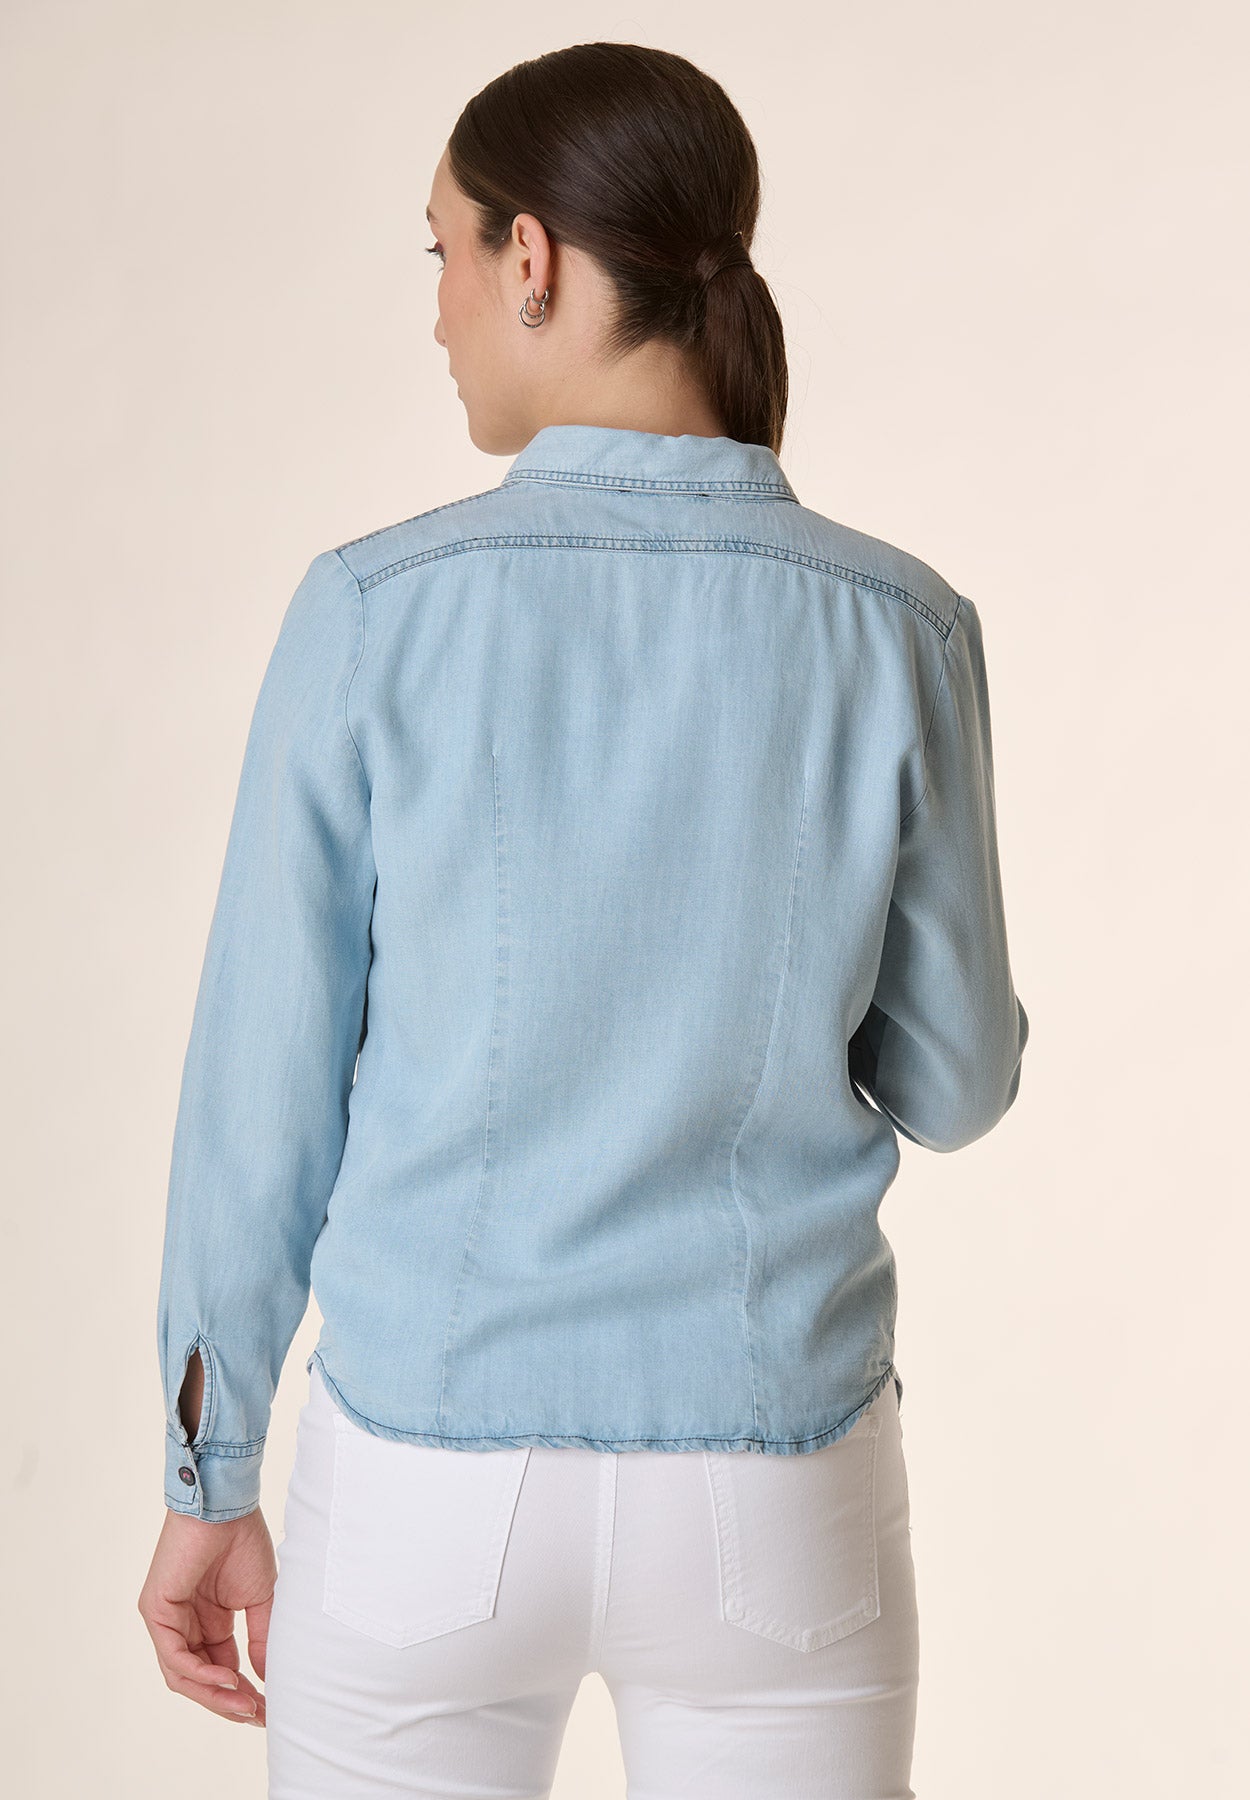 Light denim shirt with pockets and rouche